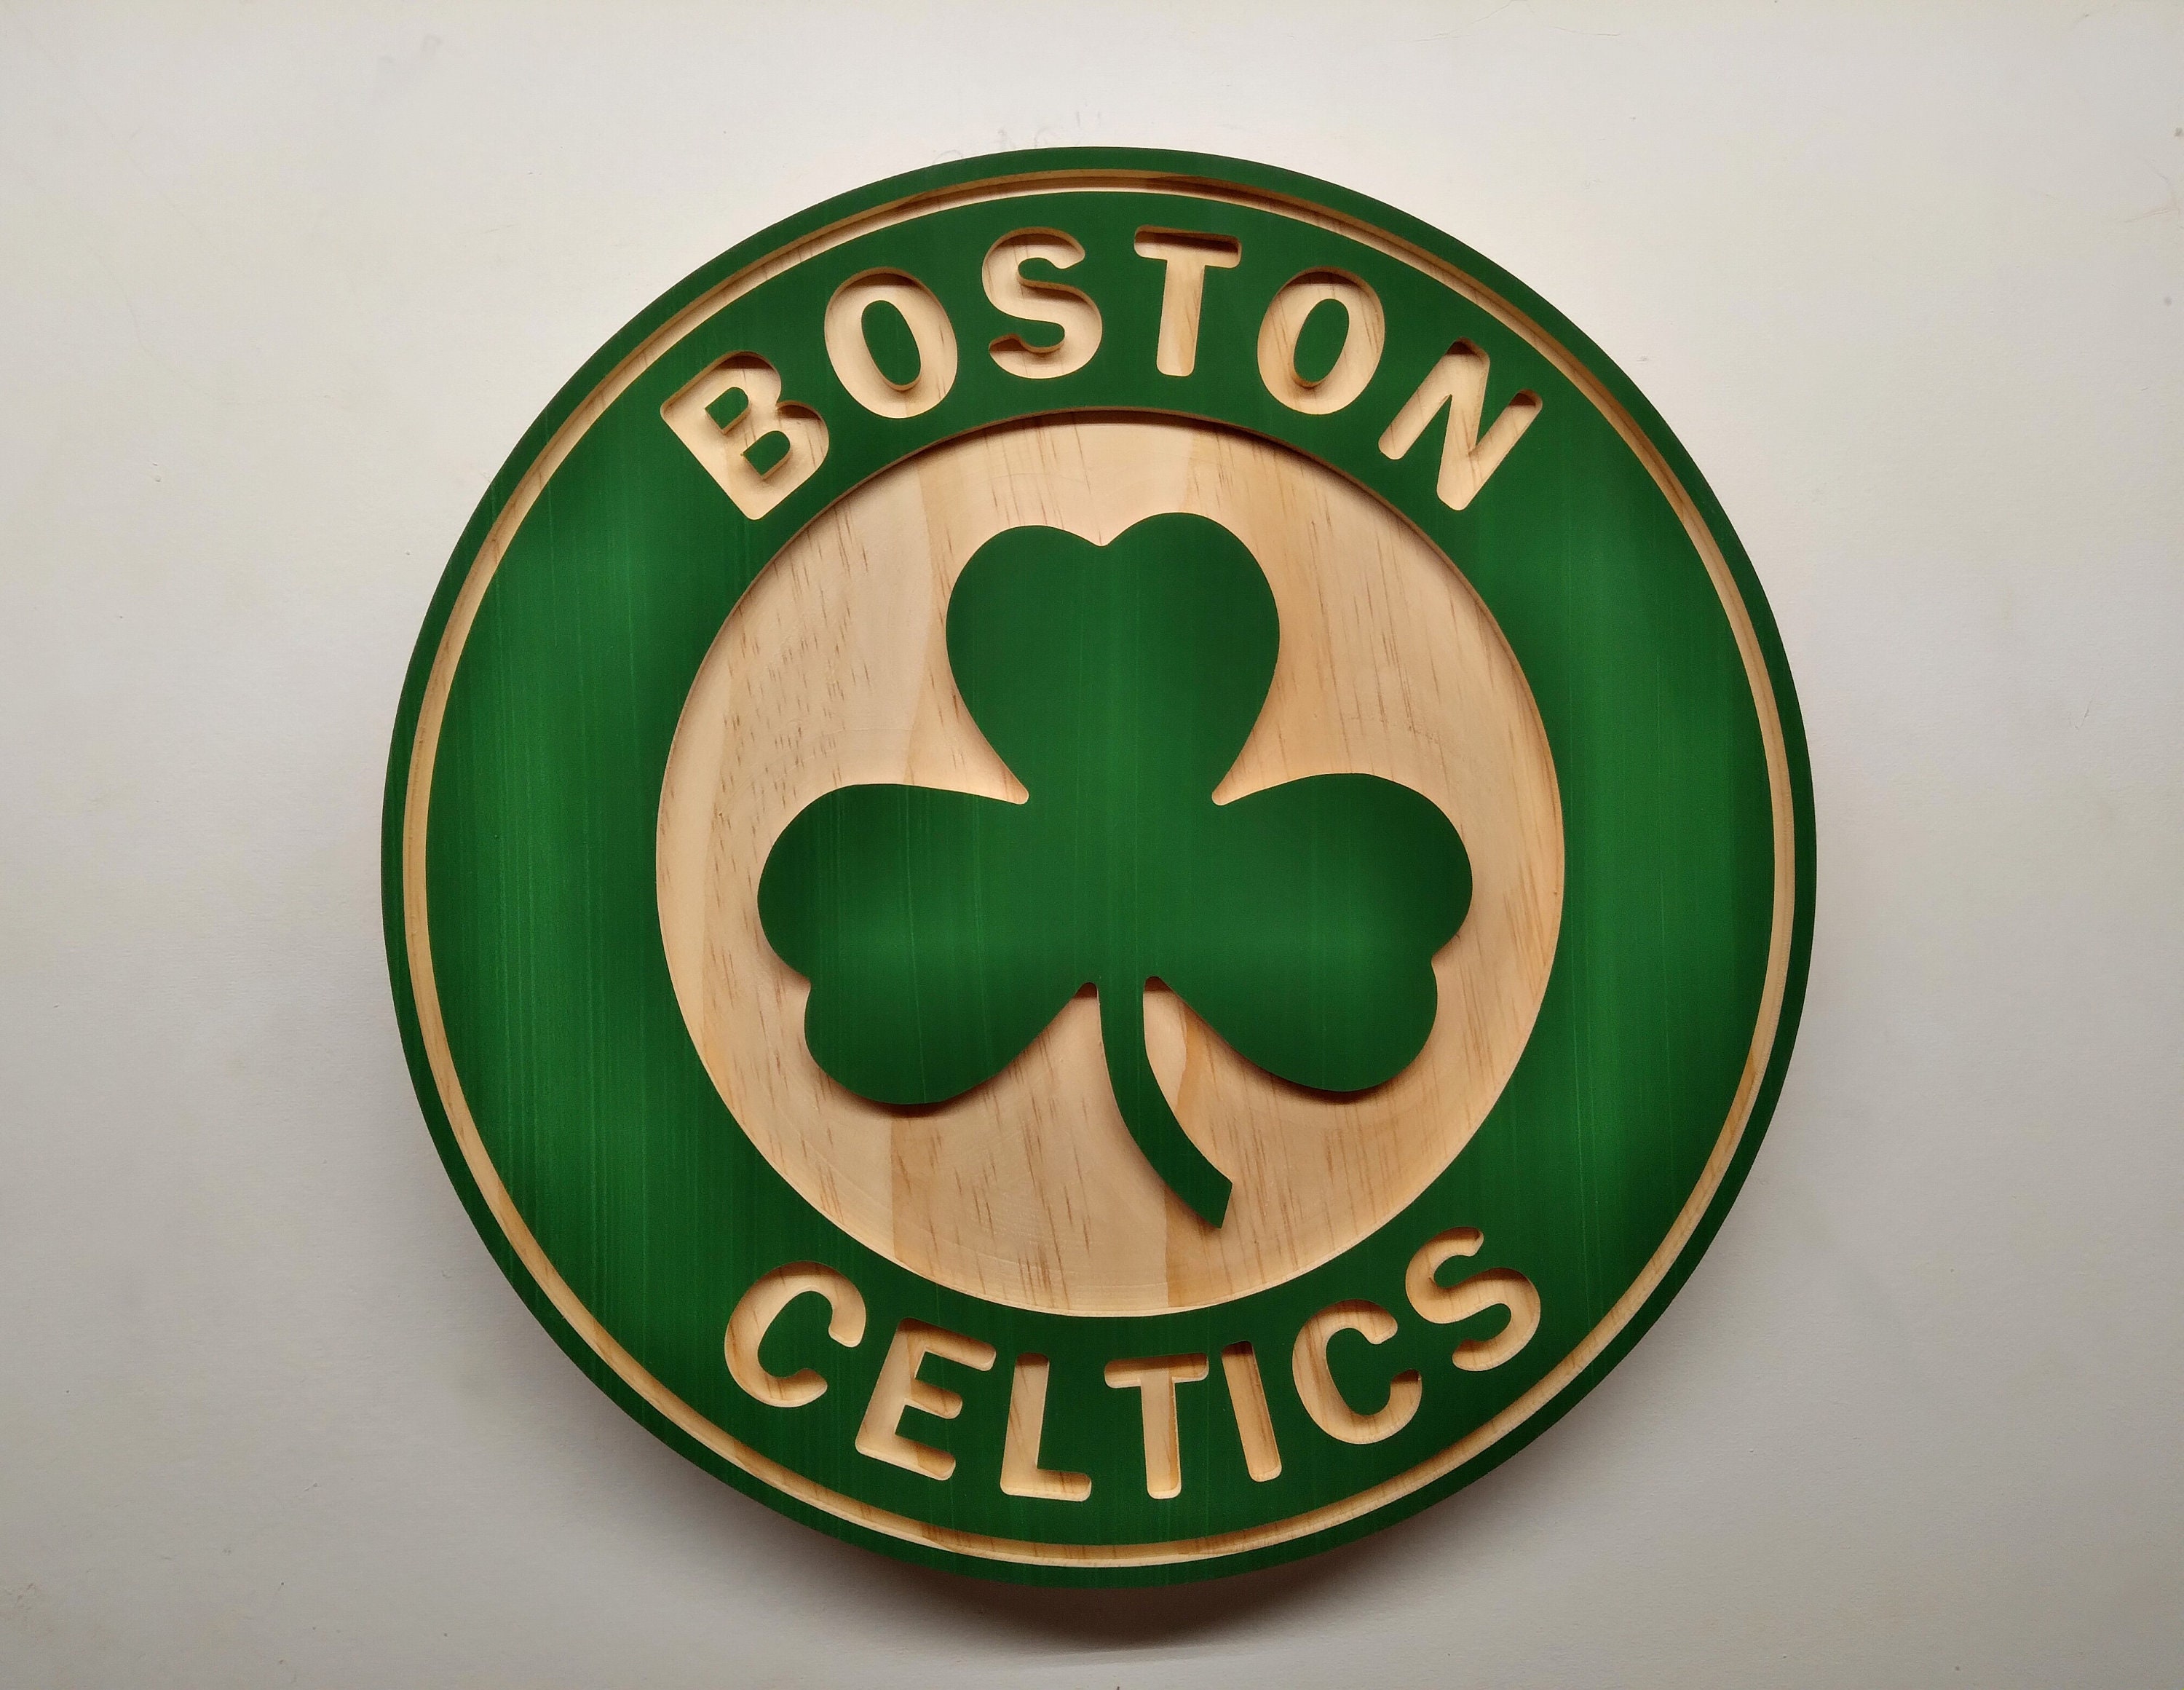 Boston Celtics Retired Jersey Wood Signs!! Your Choice of Player and Size!